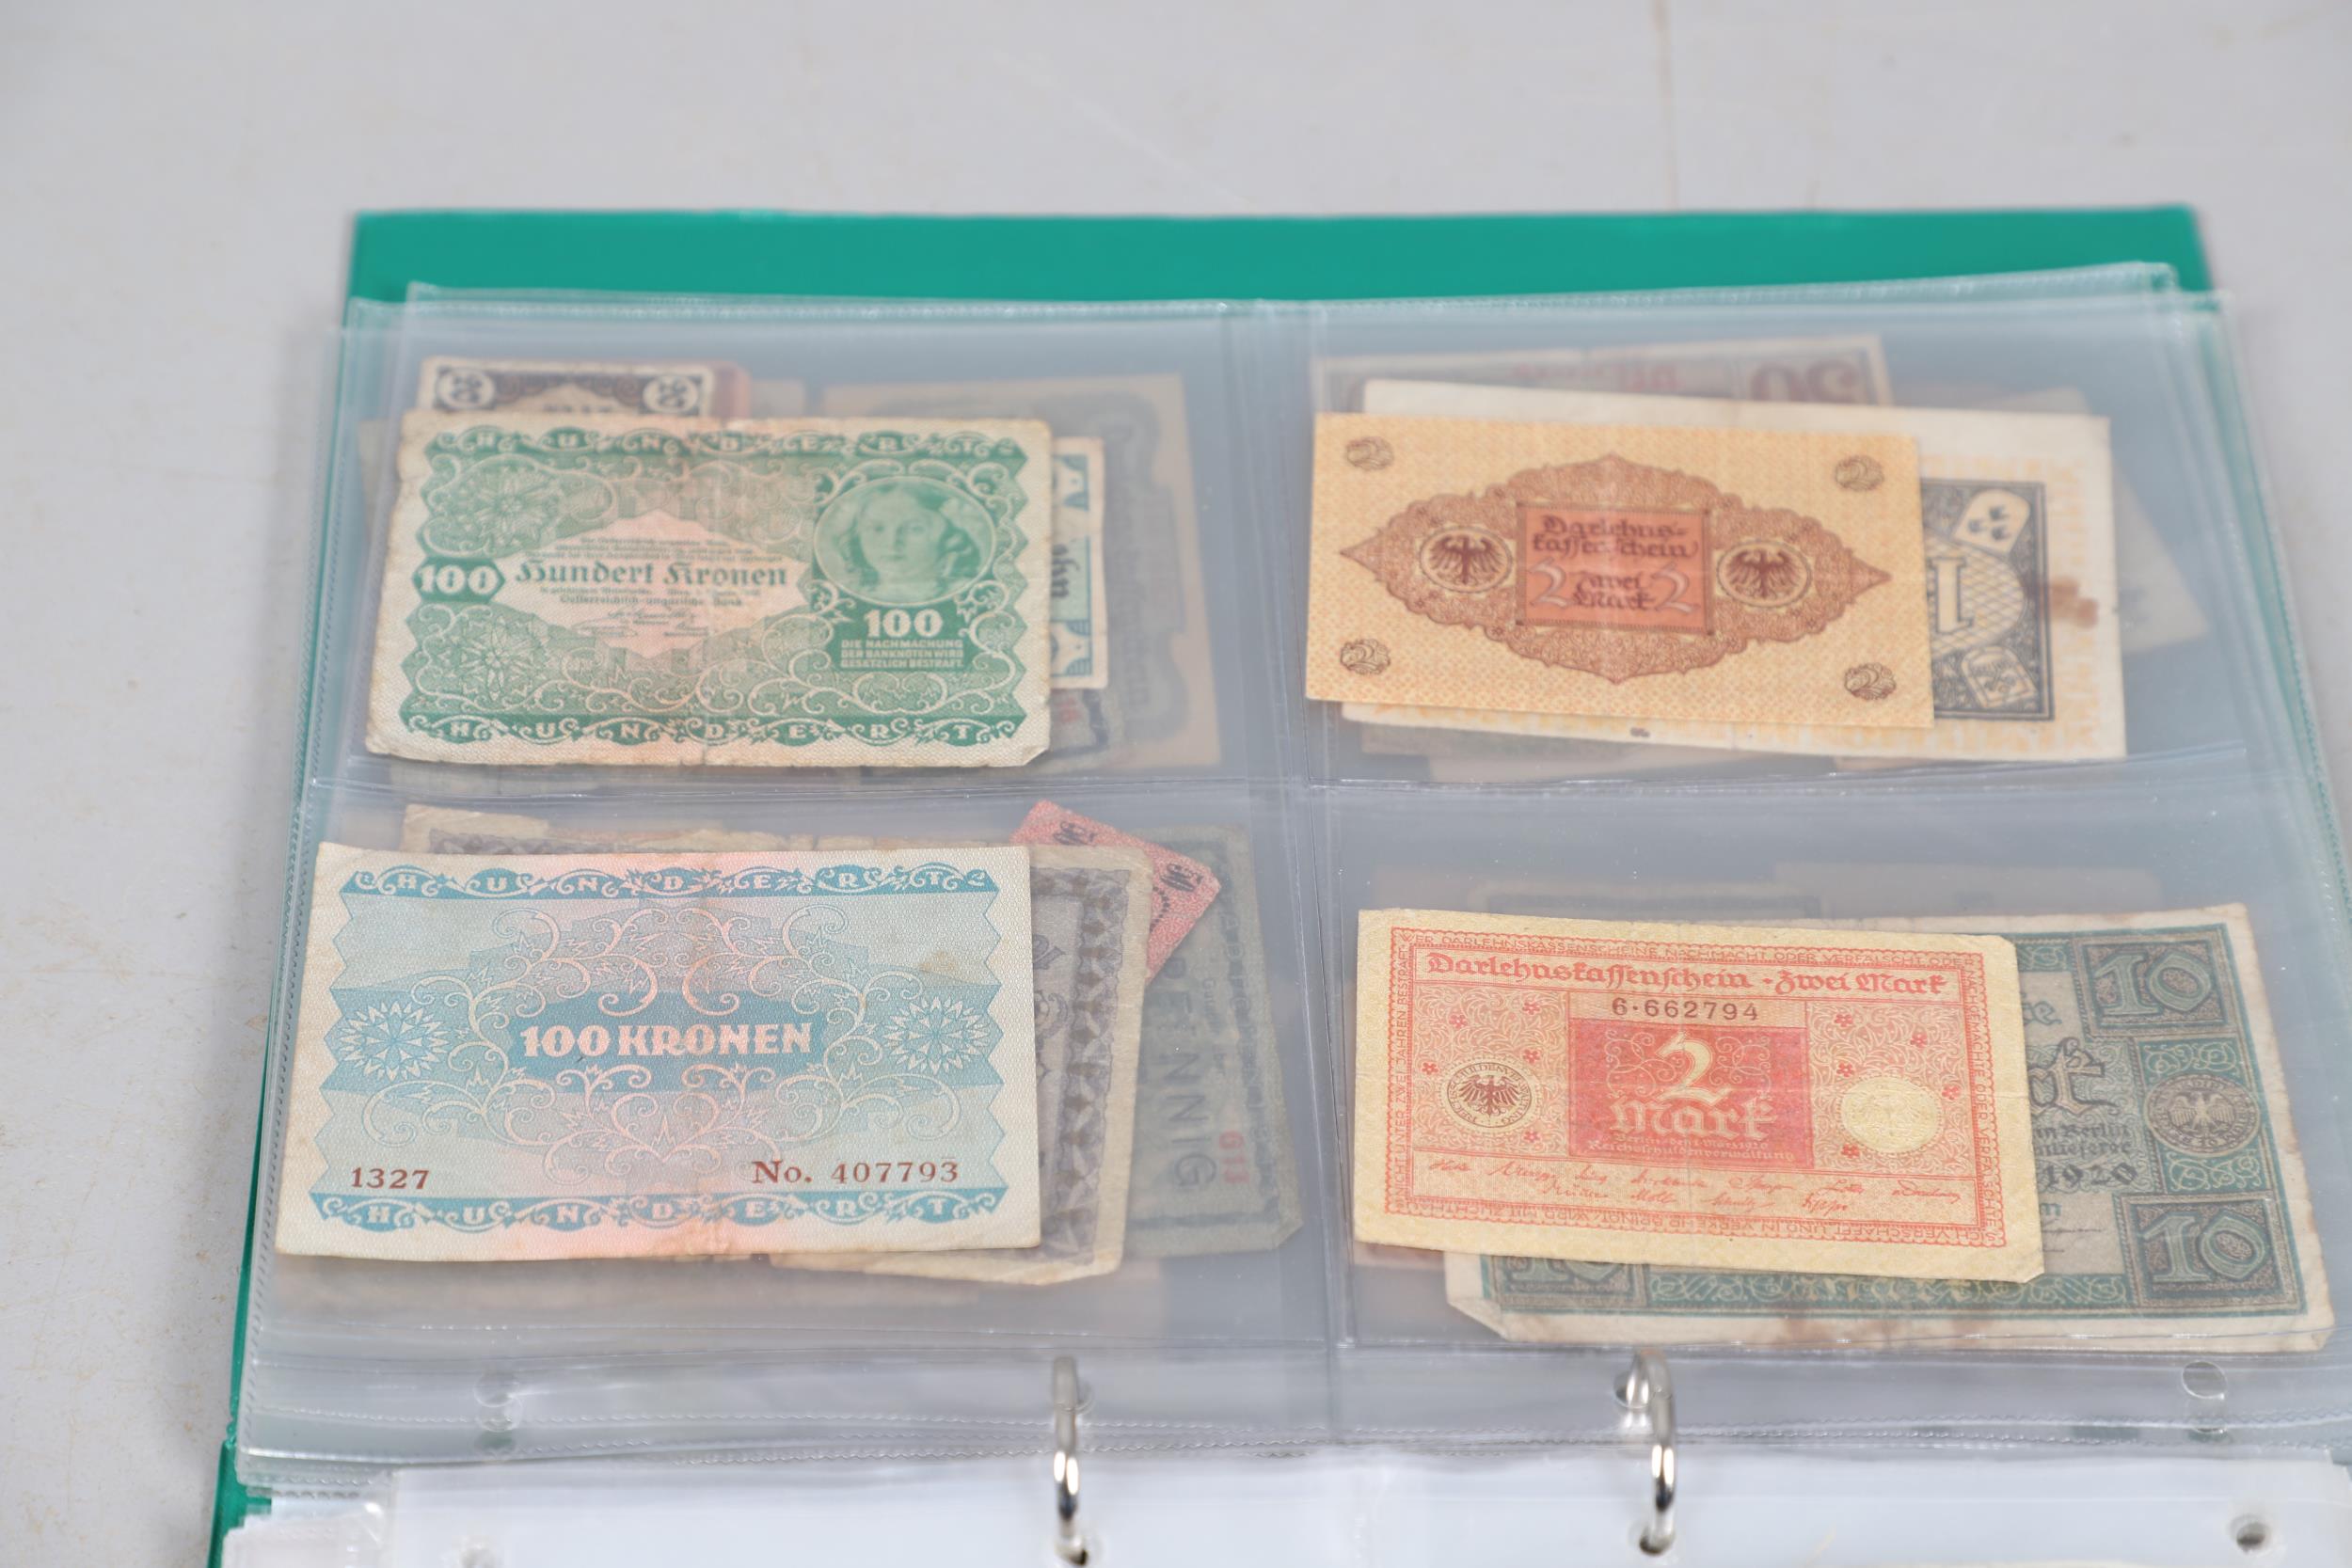 AN EXTENSIVE COLLECTION OF WORLD BANKNOTES. - Image 51 of 56